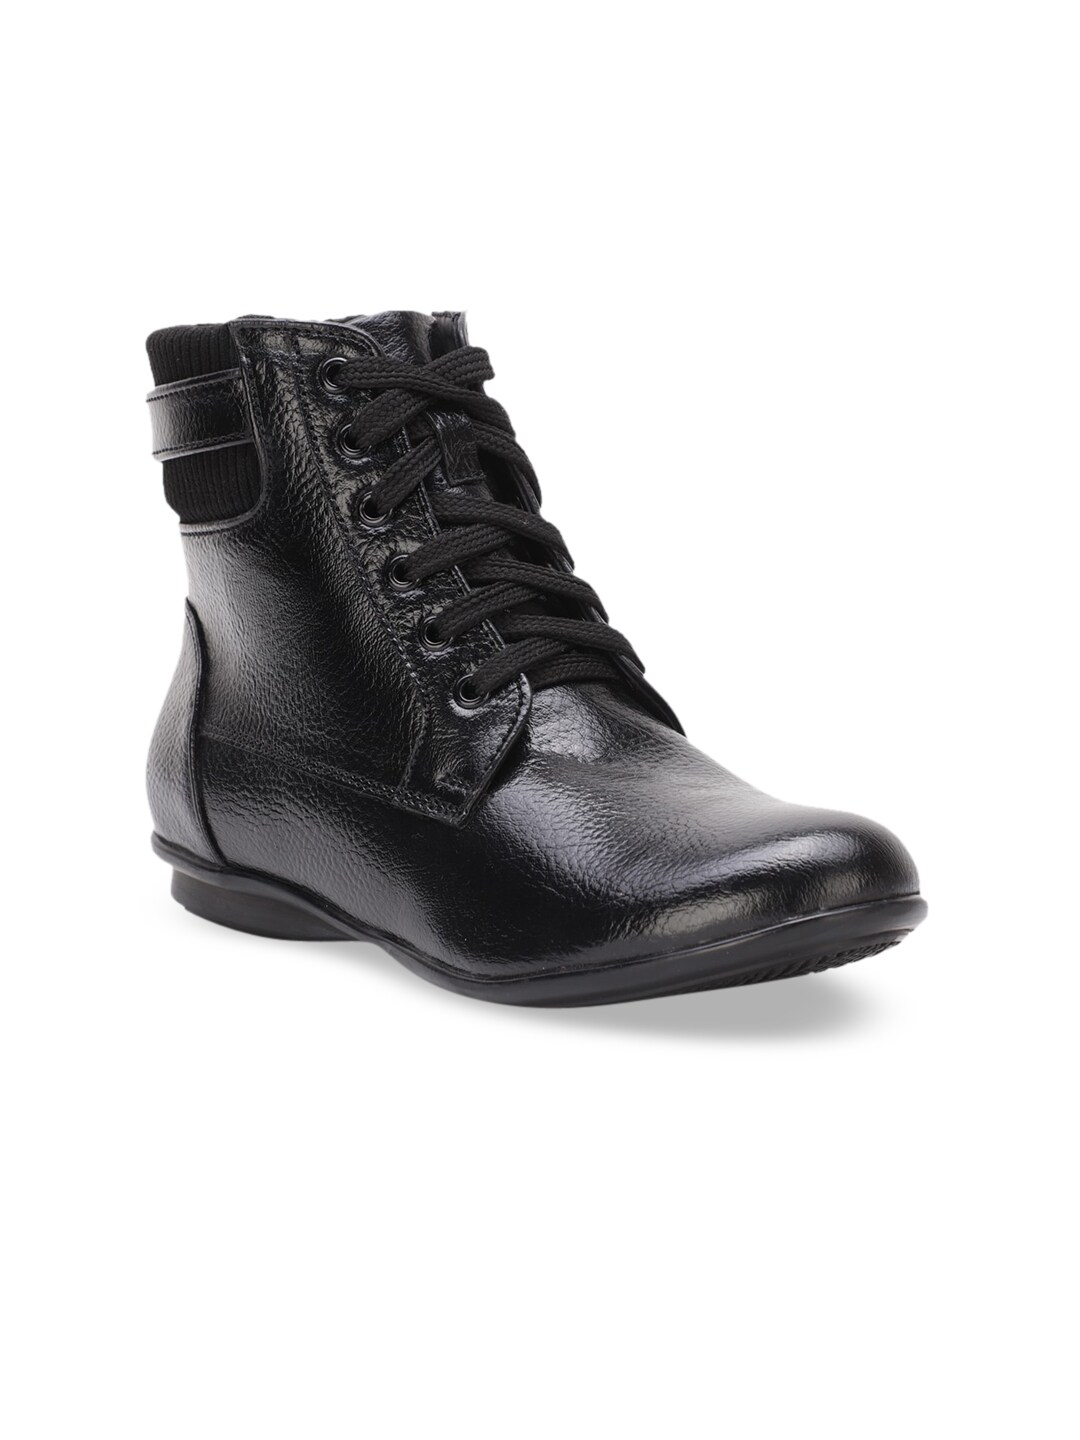 Bruno Manetti Women Black Textured Synthetic Leather High-Top Flat Boots Price in India